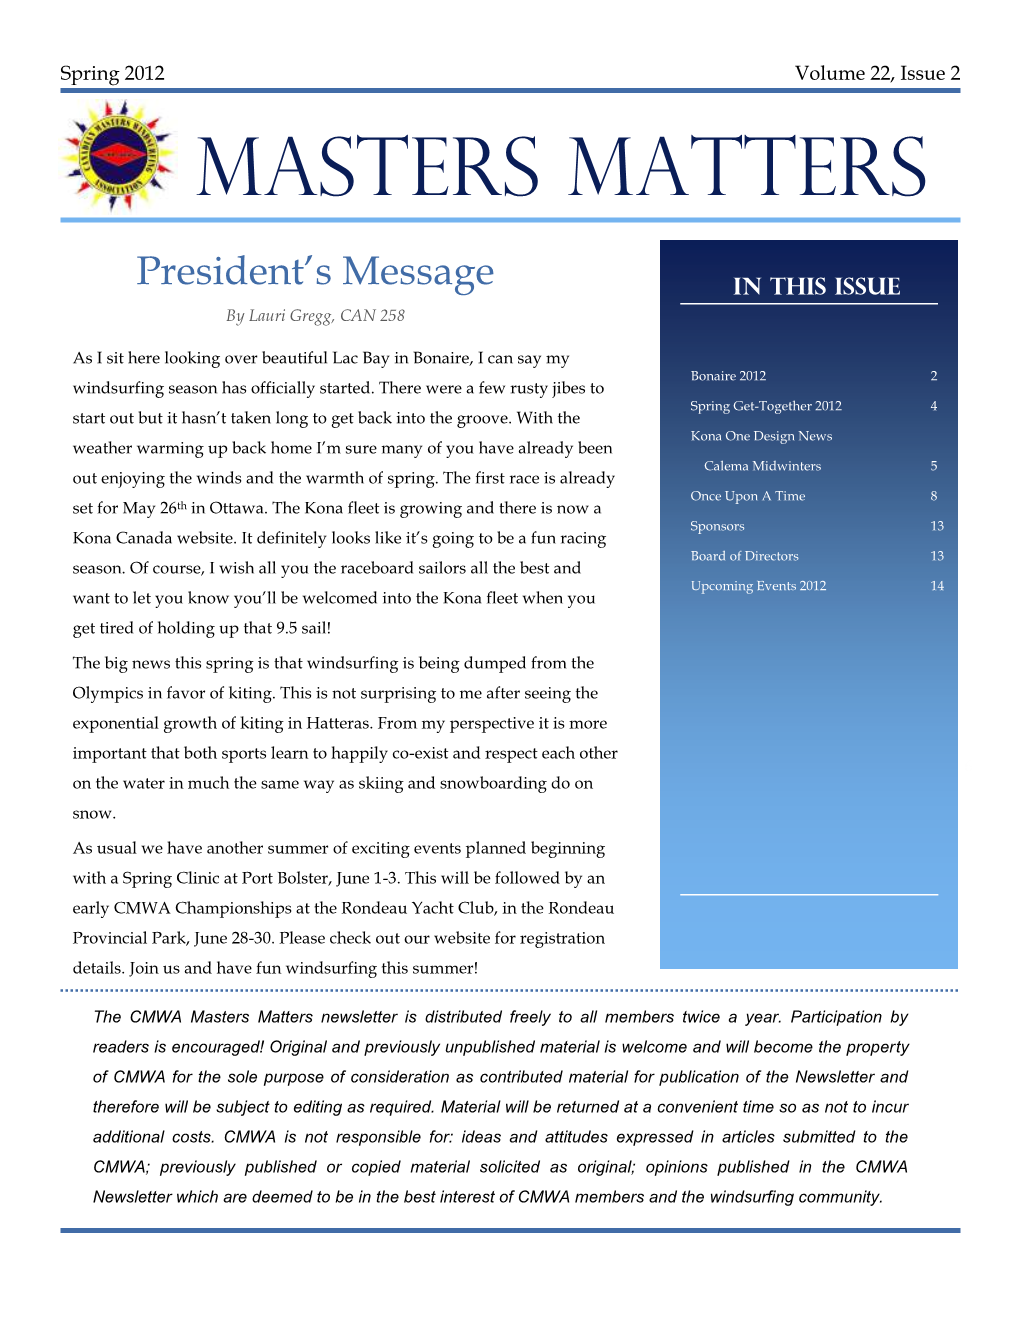 Masters Matters